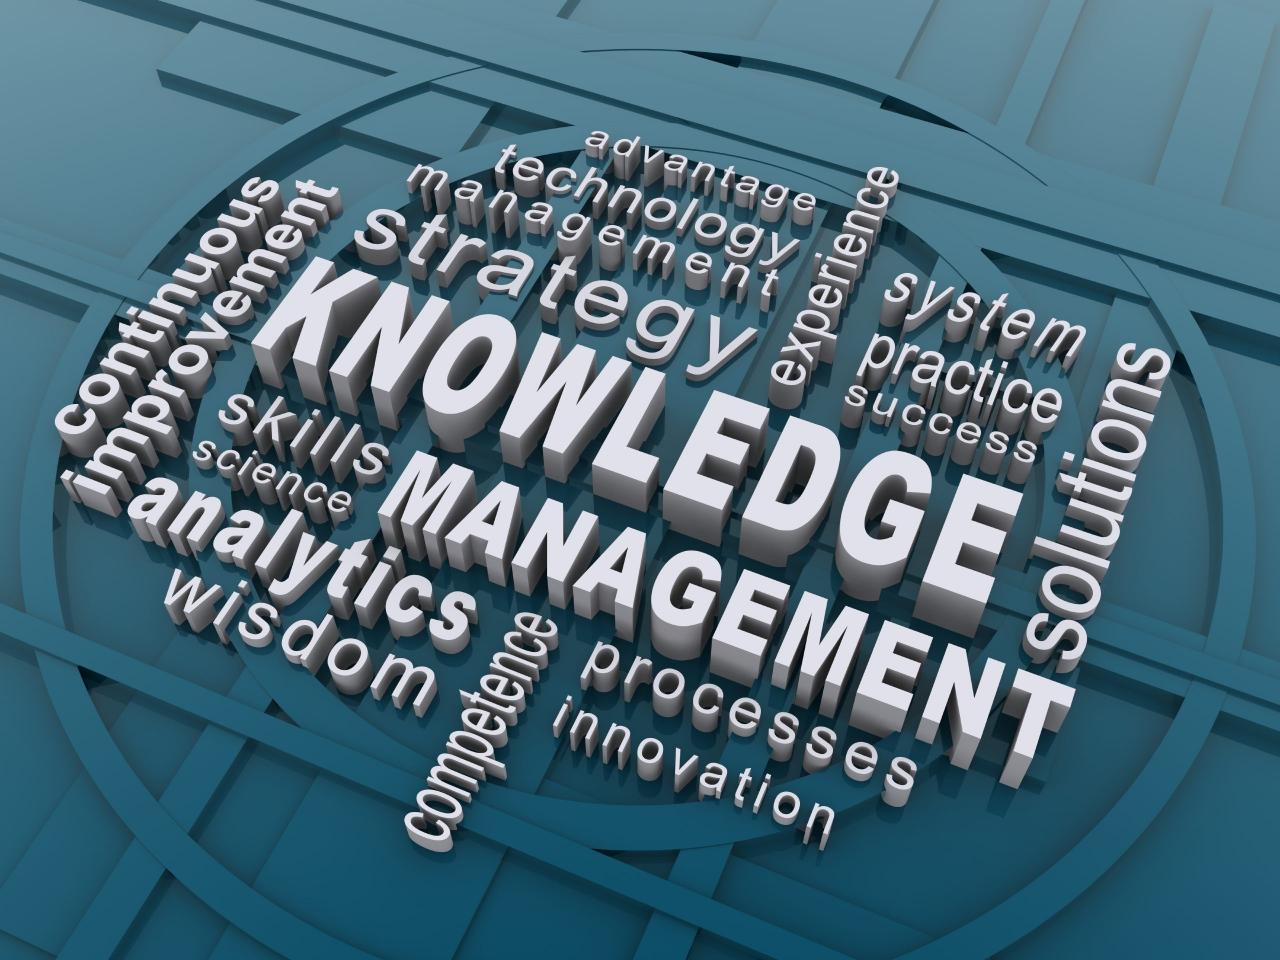 An introduction to knowledge management